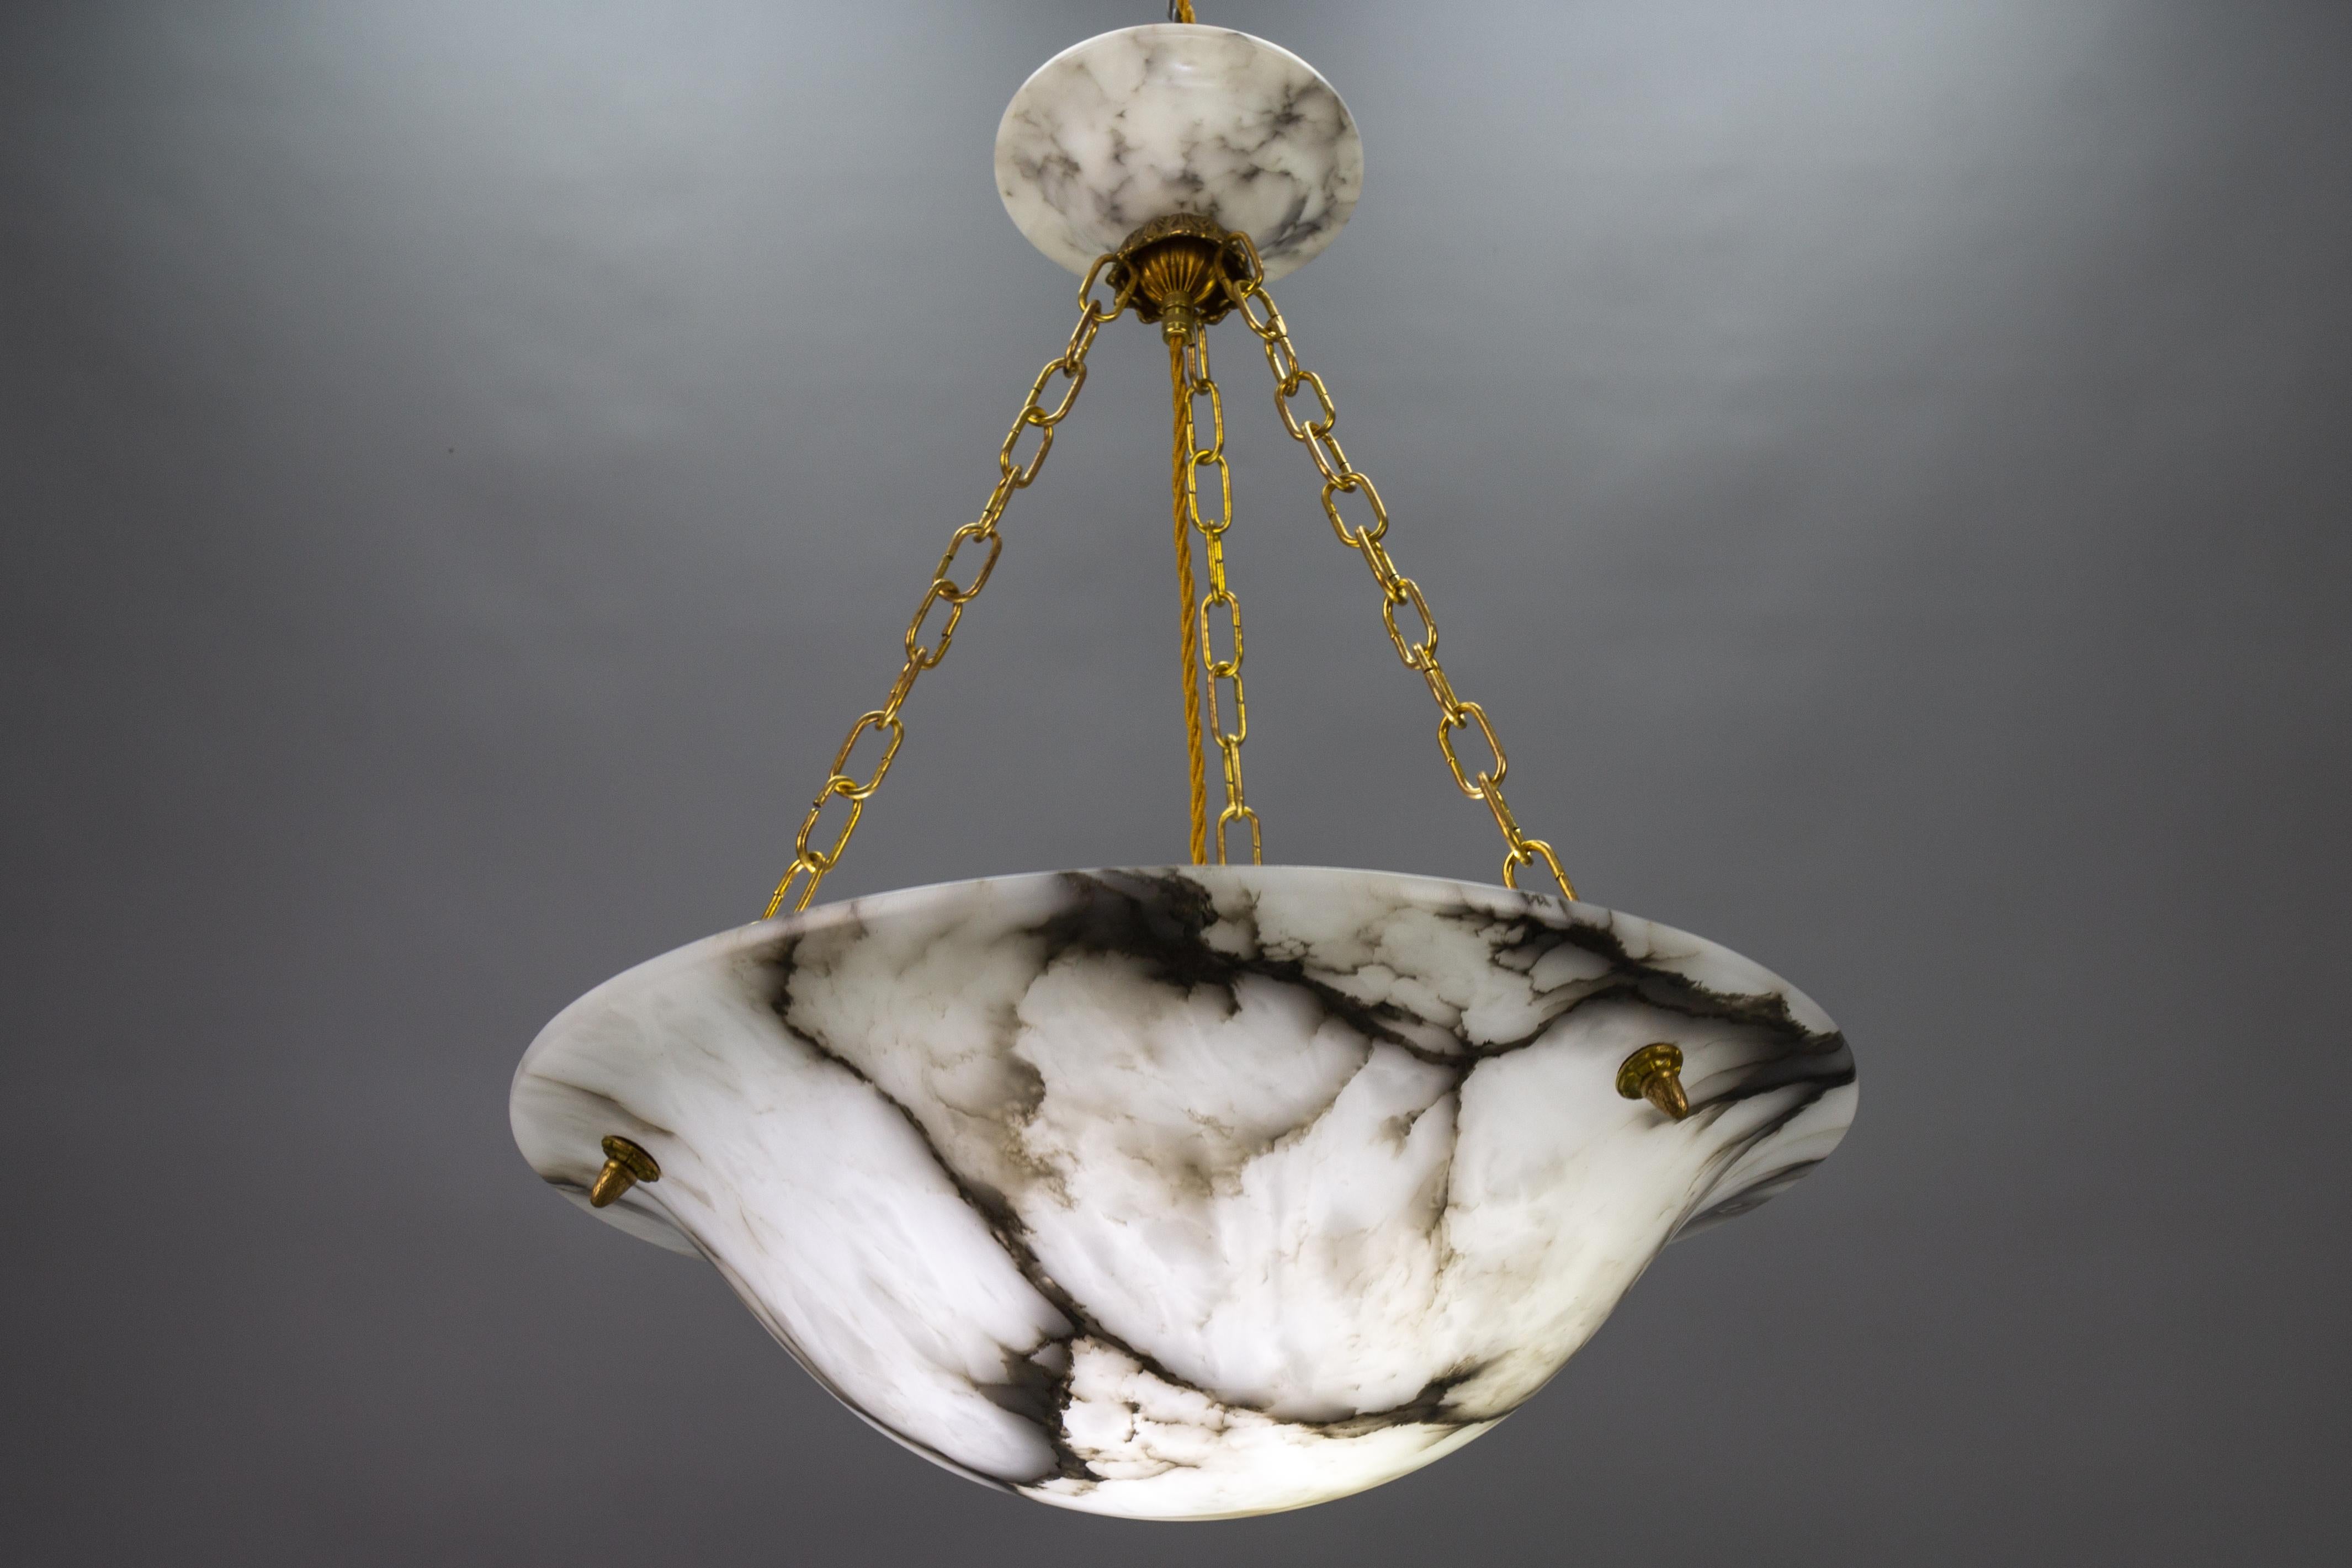 French Art Deco White and Black Veined Alabaster and Brass Pendant Light, ca 1920 For Sale